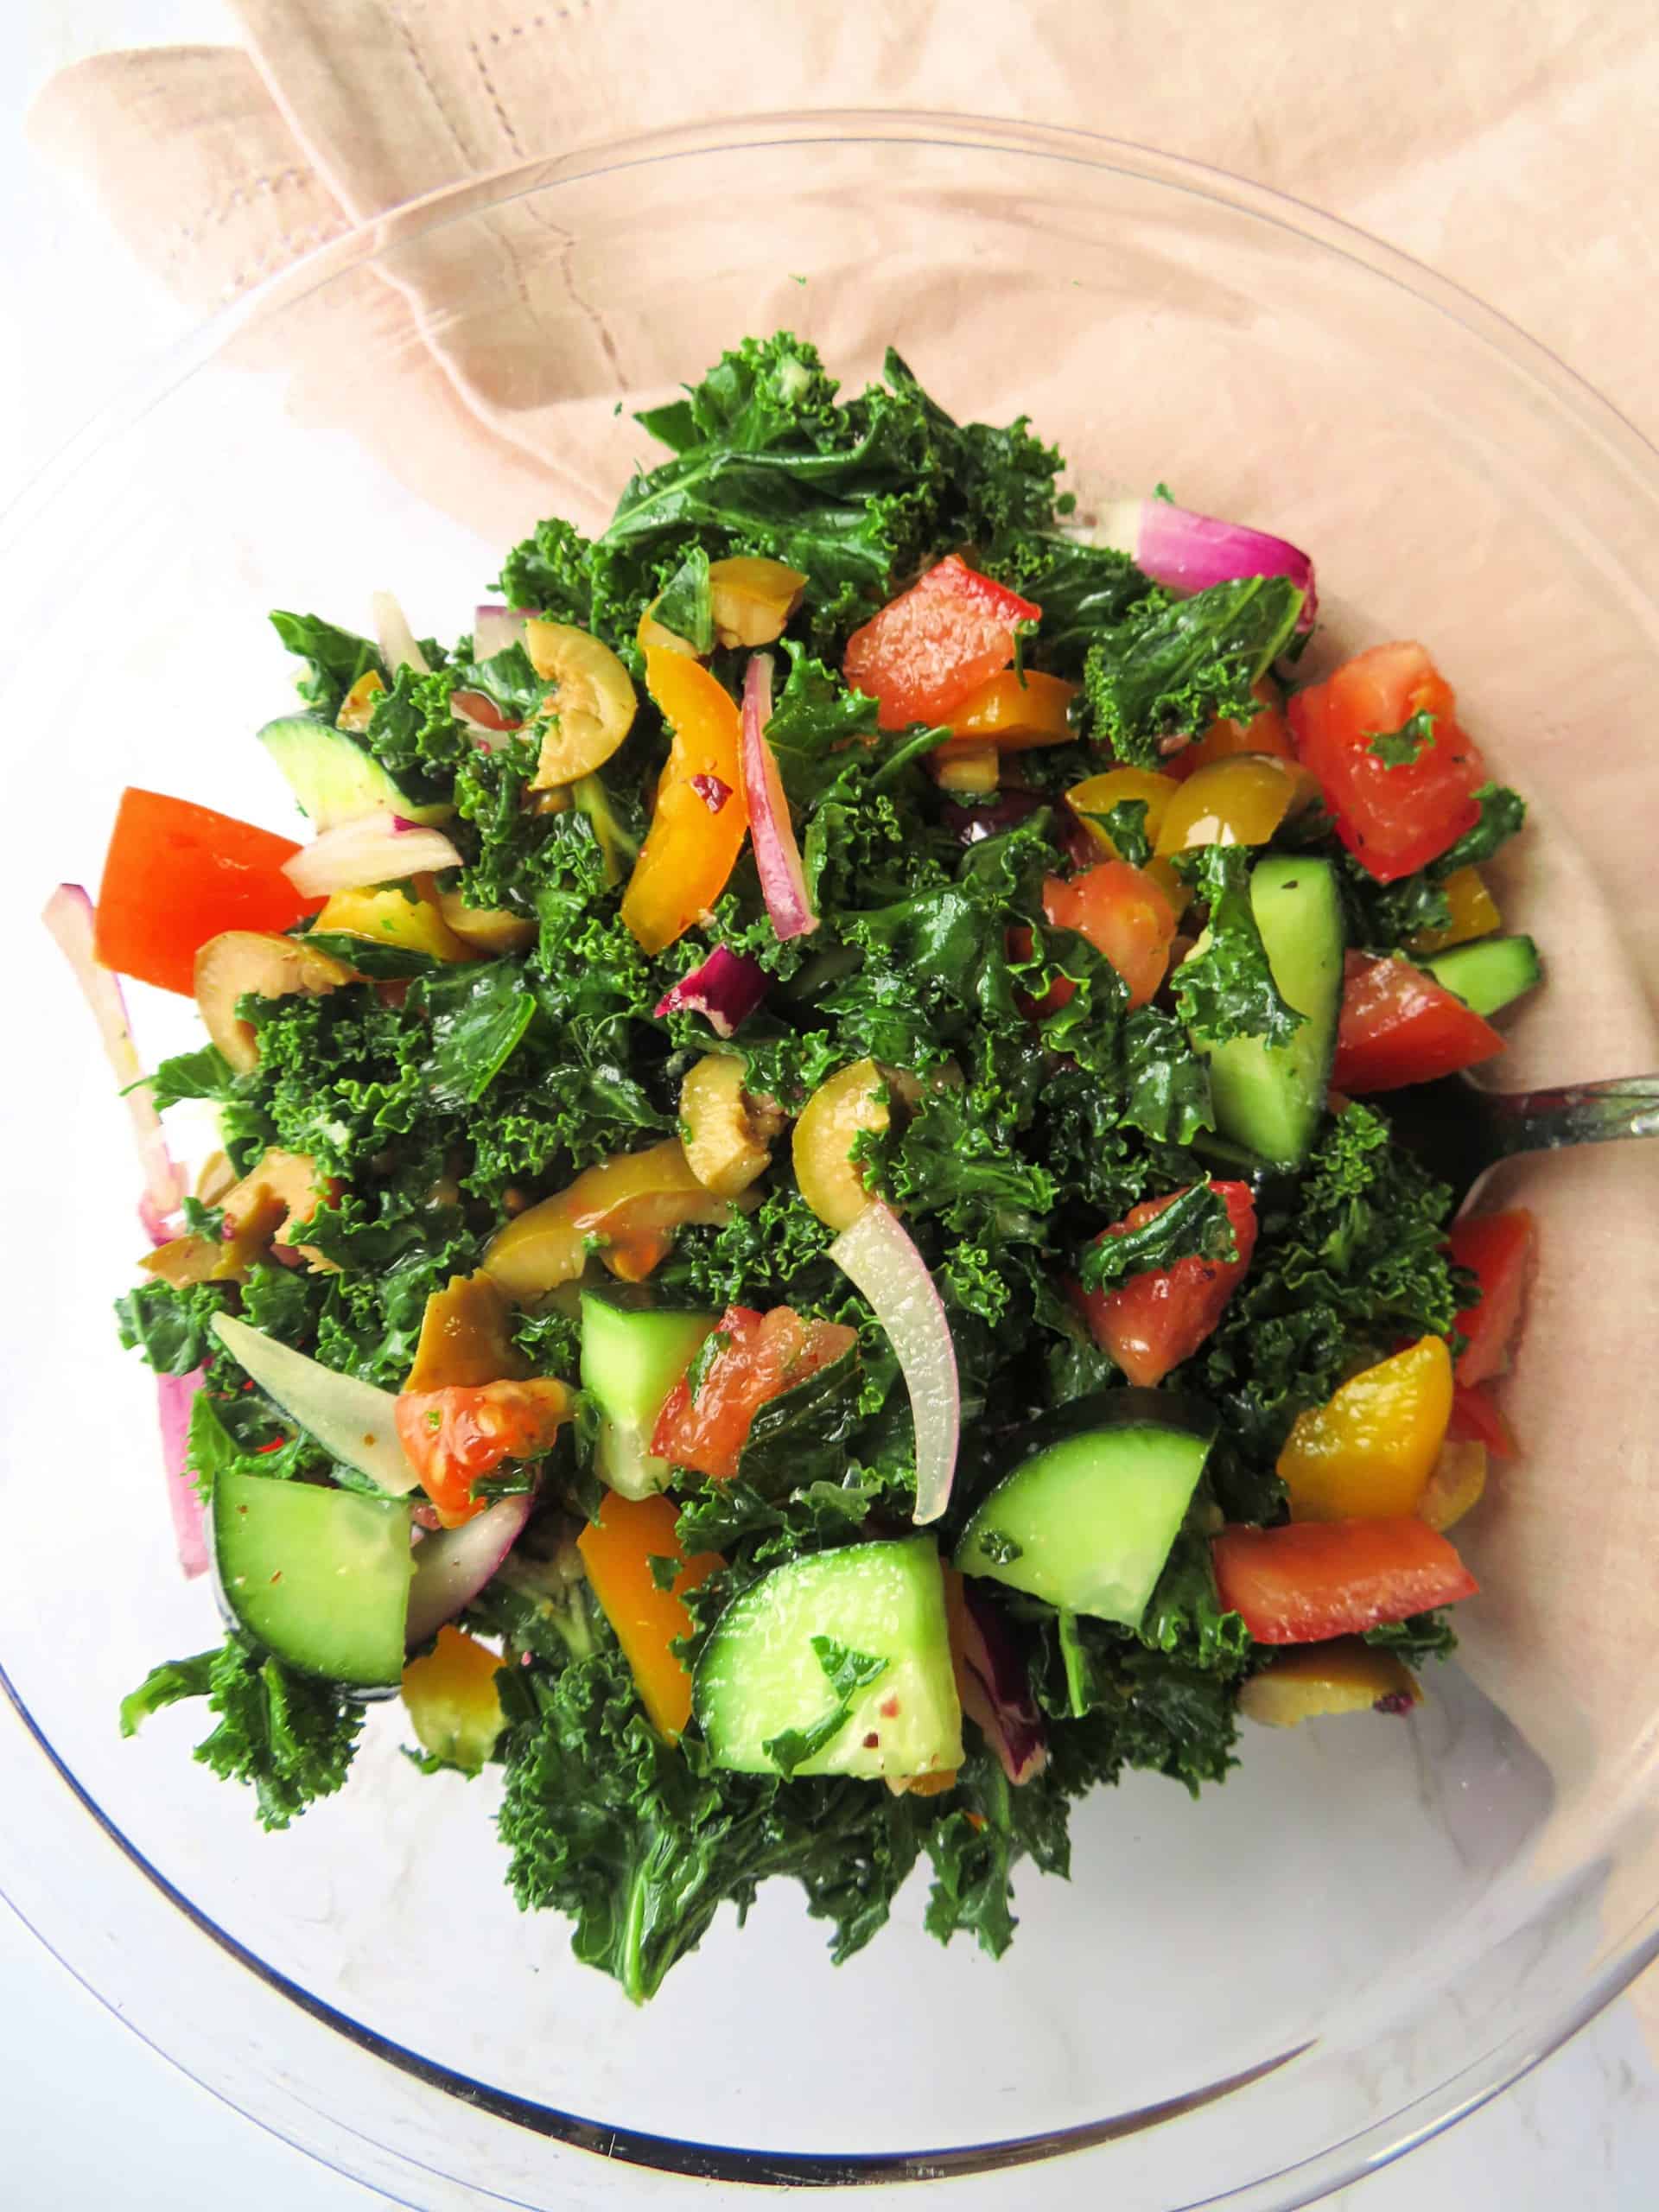 Top view of kale salad in a bowl.